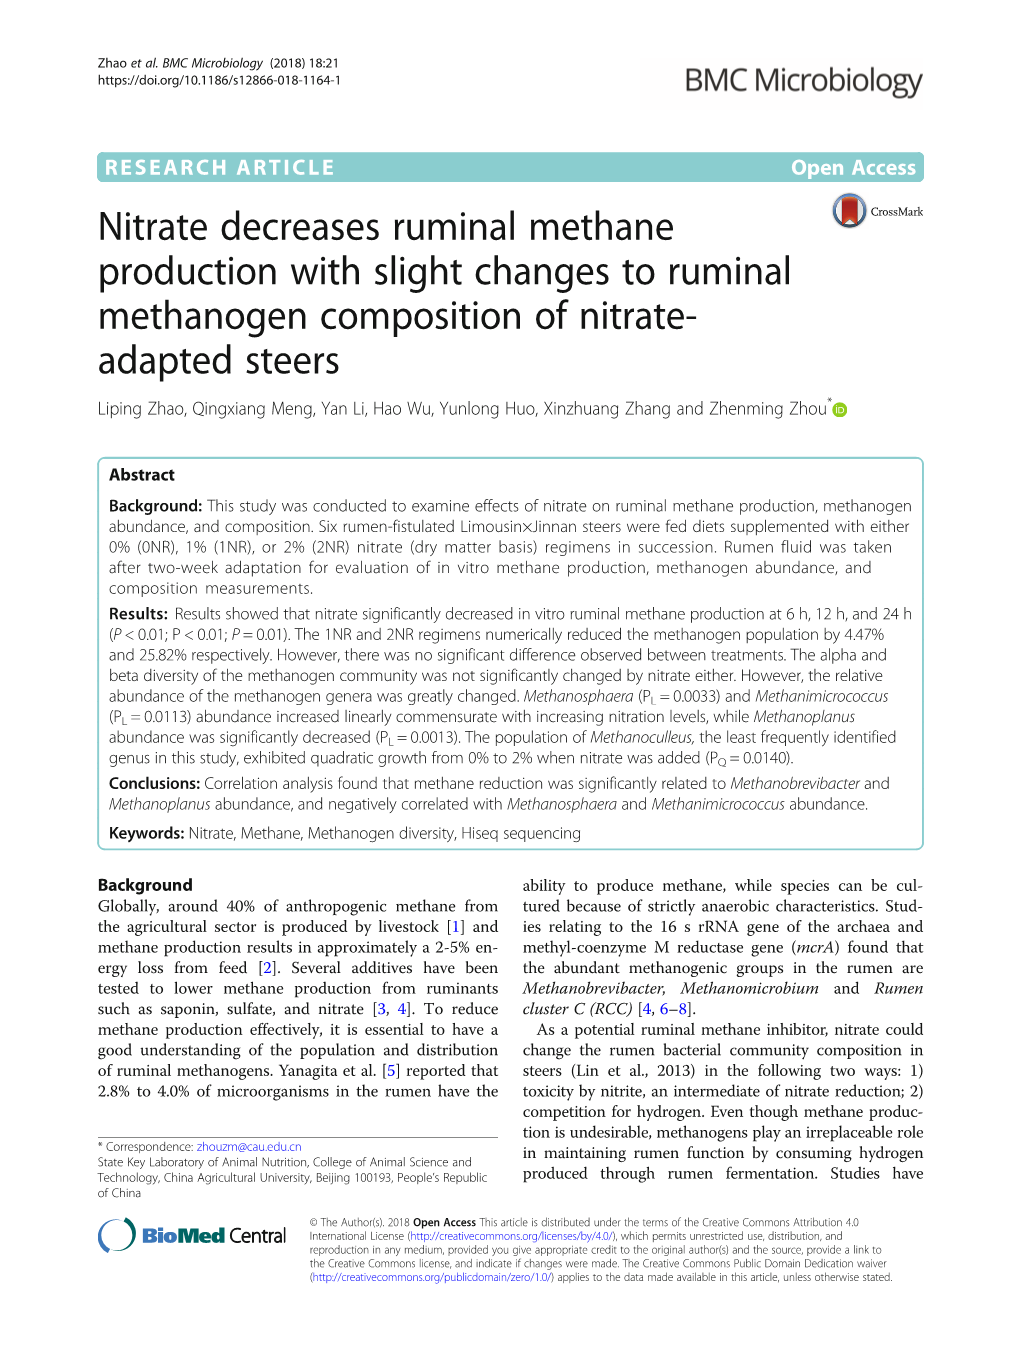 Nitrate Decreases Ruminal Methane Production with Slight Changes To